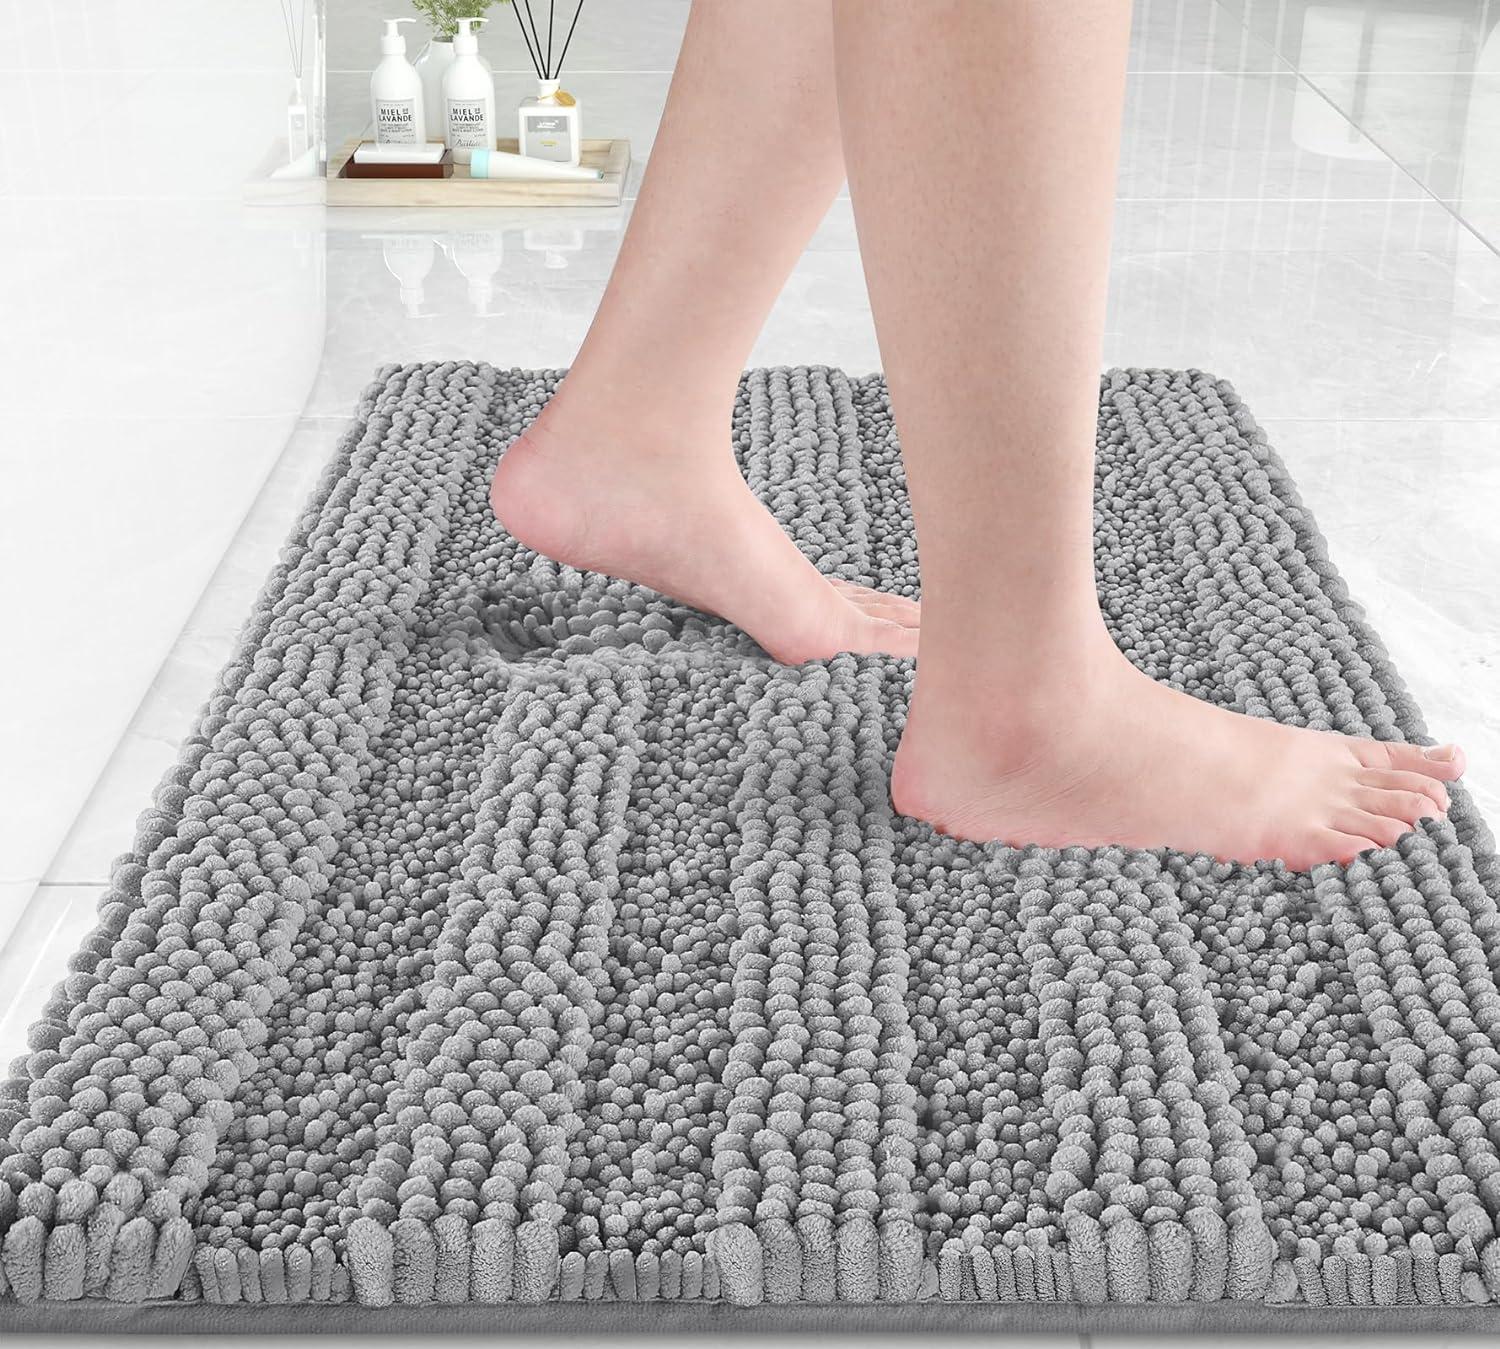 Yimobra Extra Thick Chenille Bathroom Rug Mat for $4.94